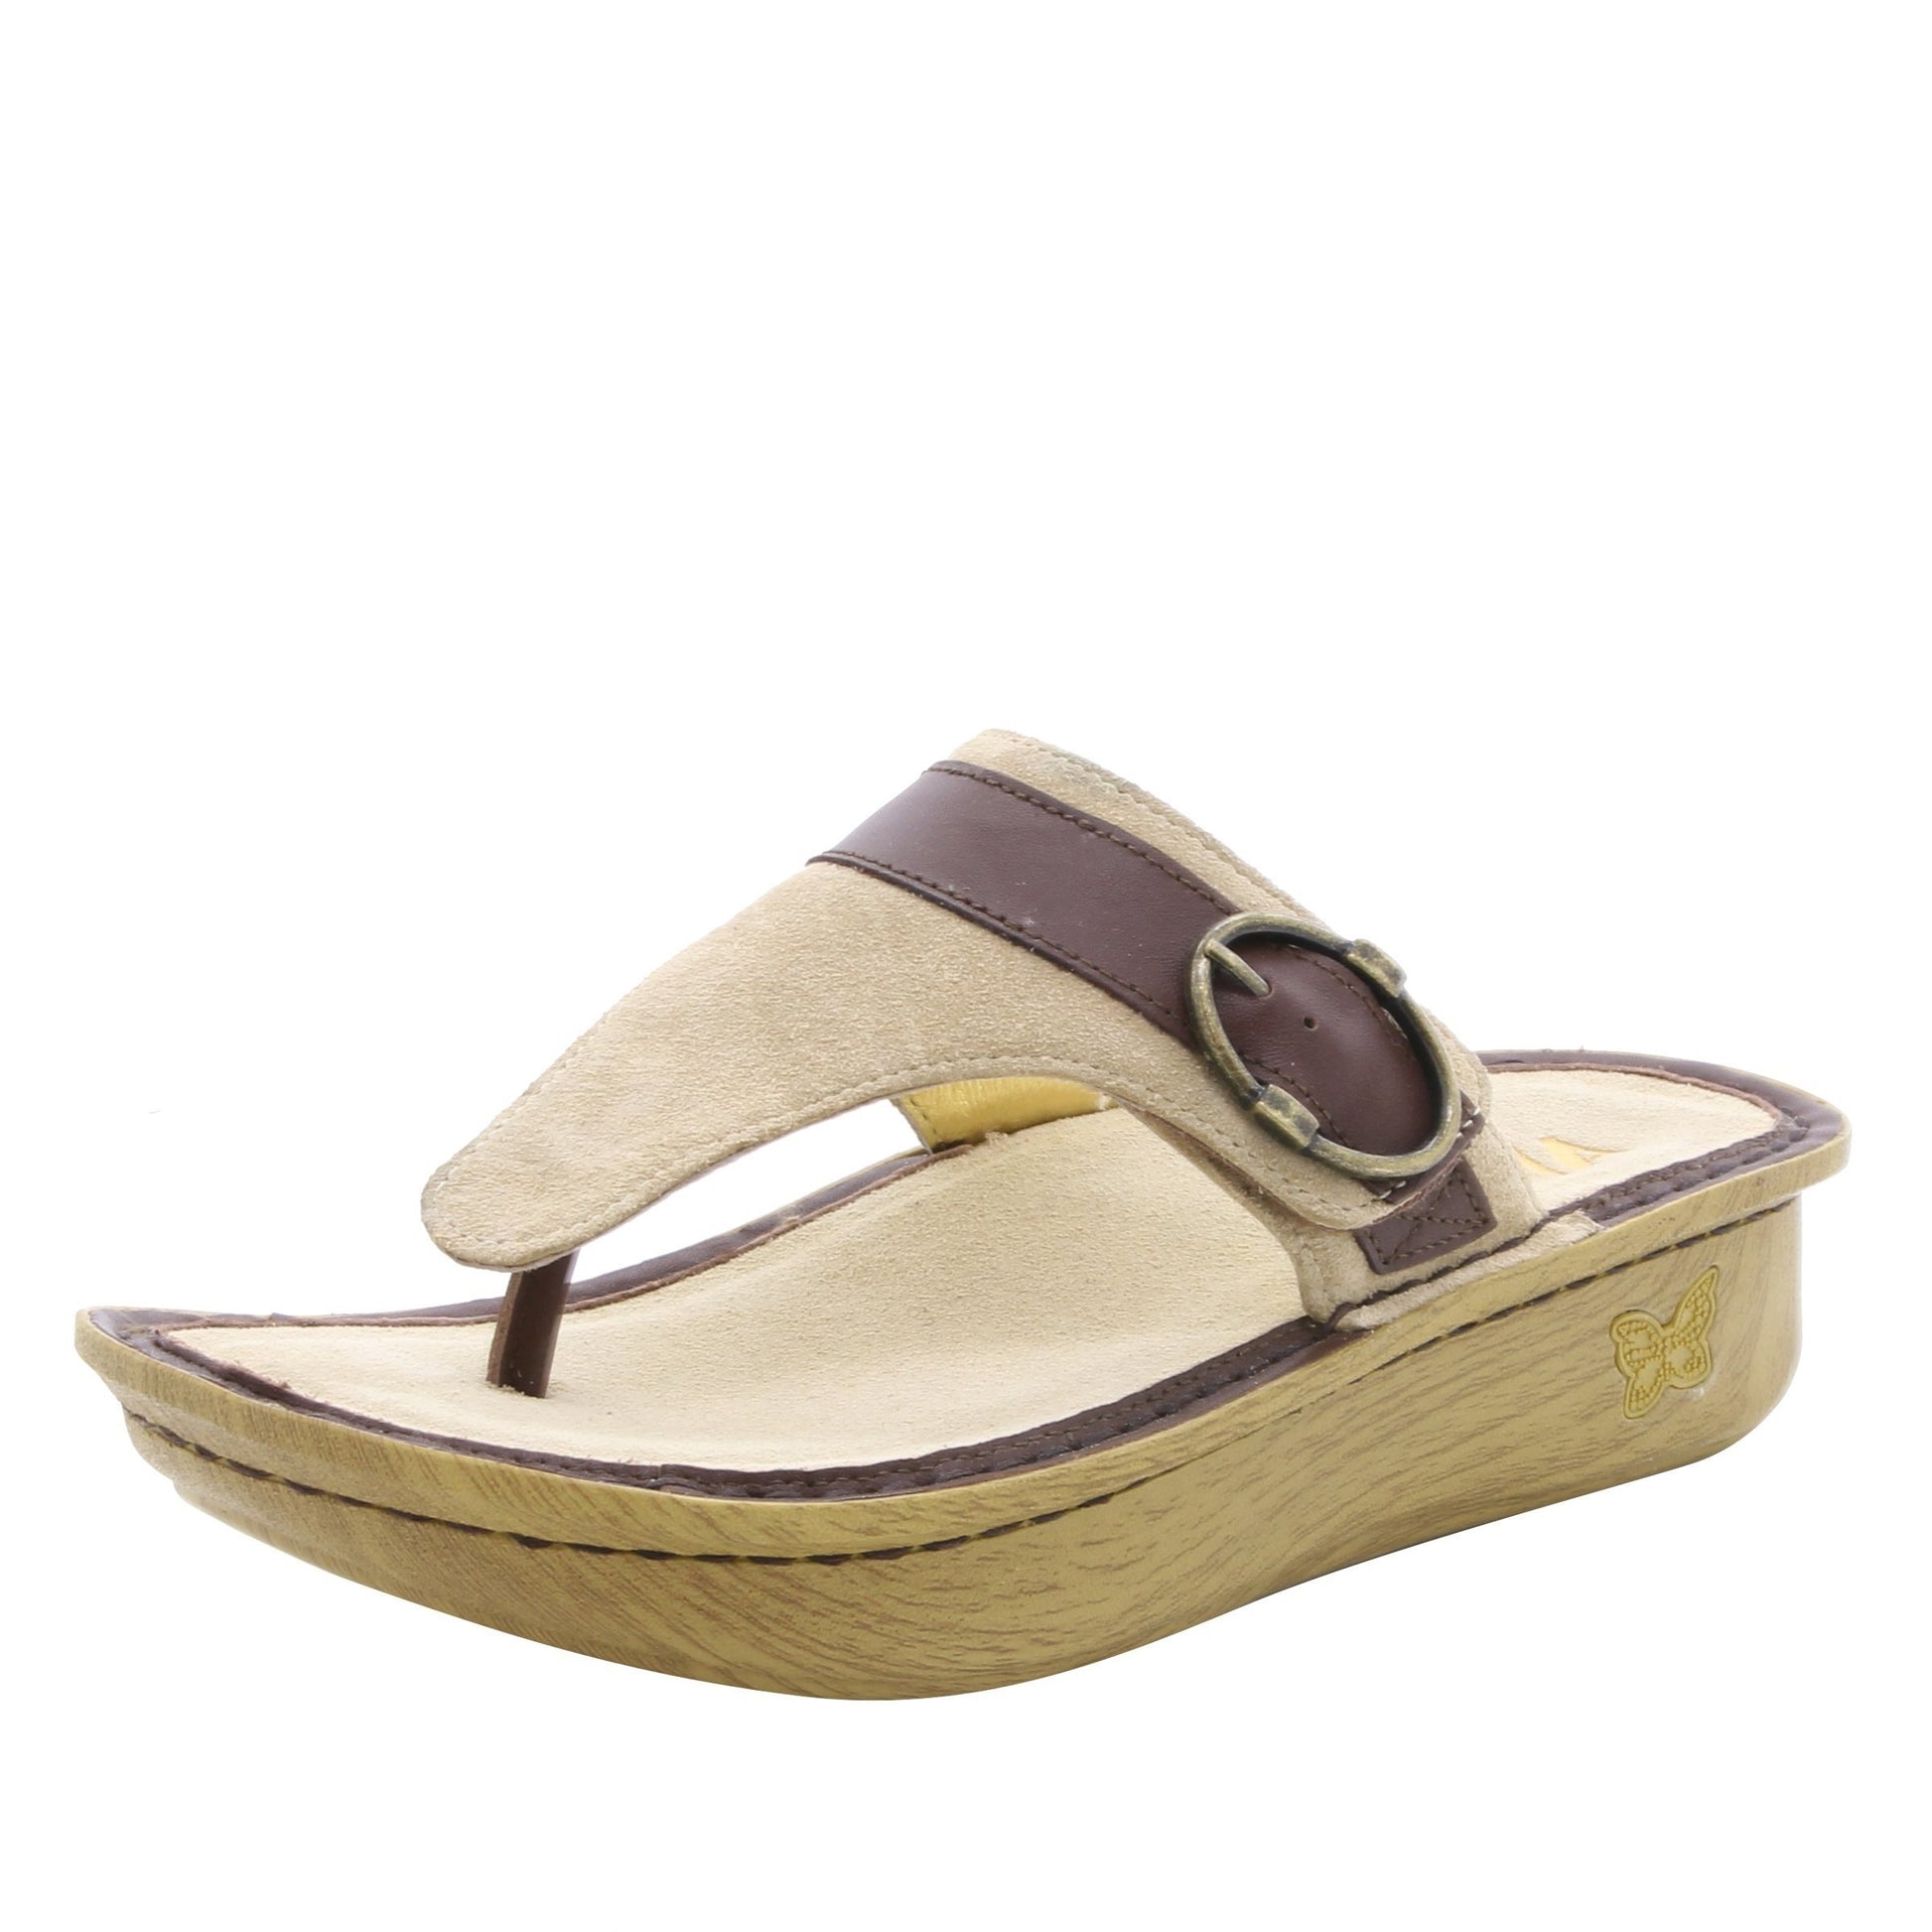 Alegria Sale Shoe Size 41 Cody Thong Sandal in Sand at Parker's Clothing and Shoes.